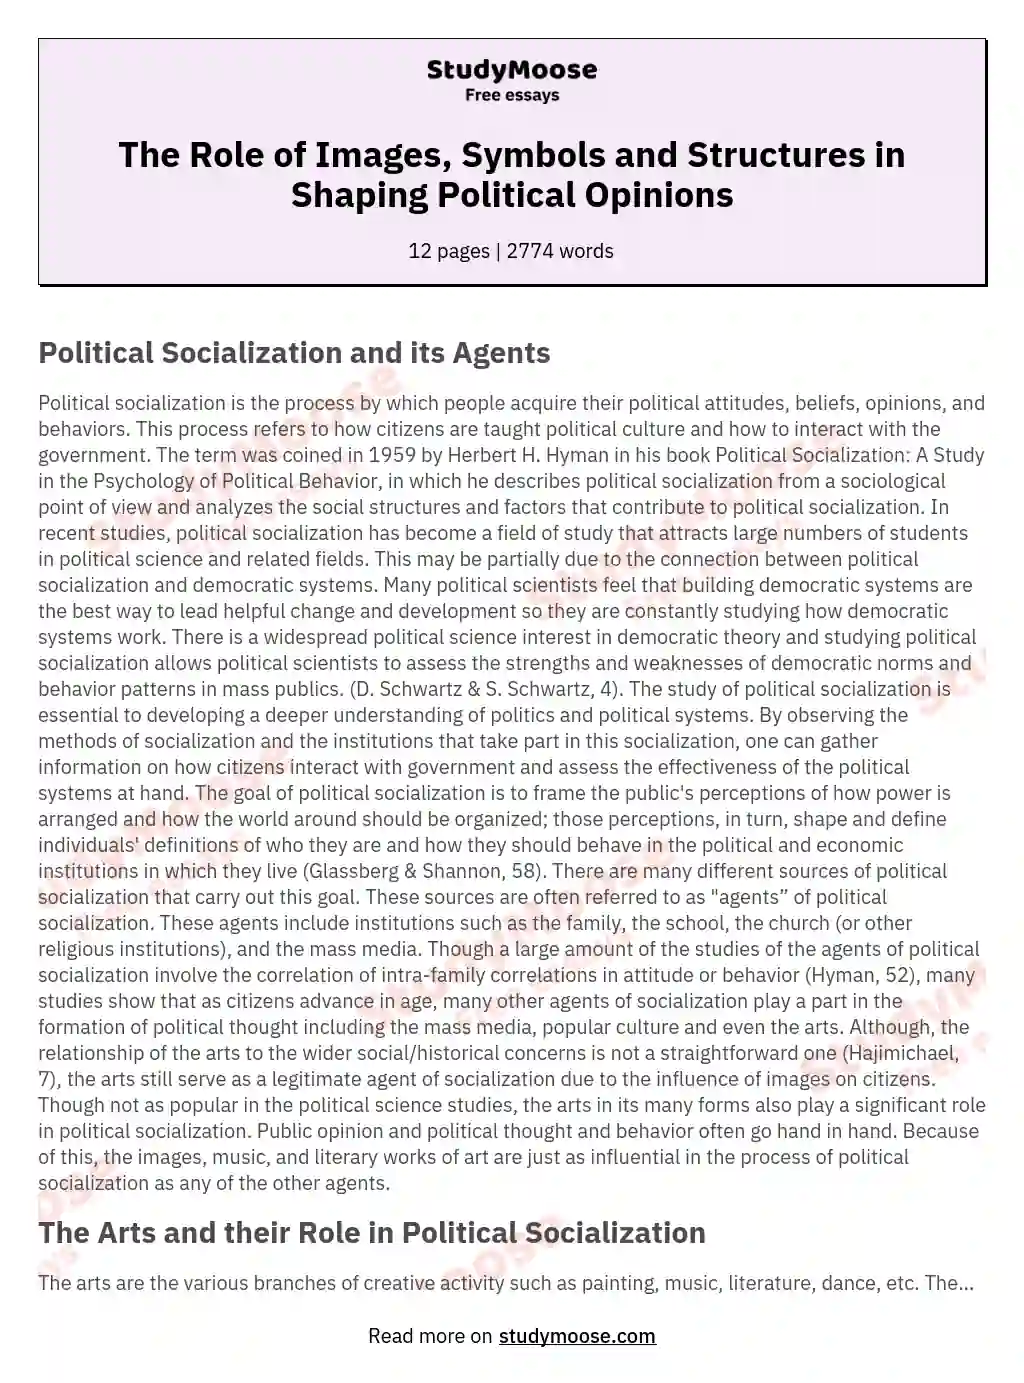 The Role of Images, Symbols and Structures in Shaping Political Opinions essay